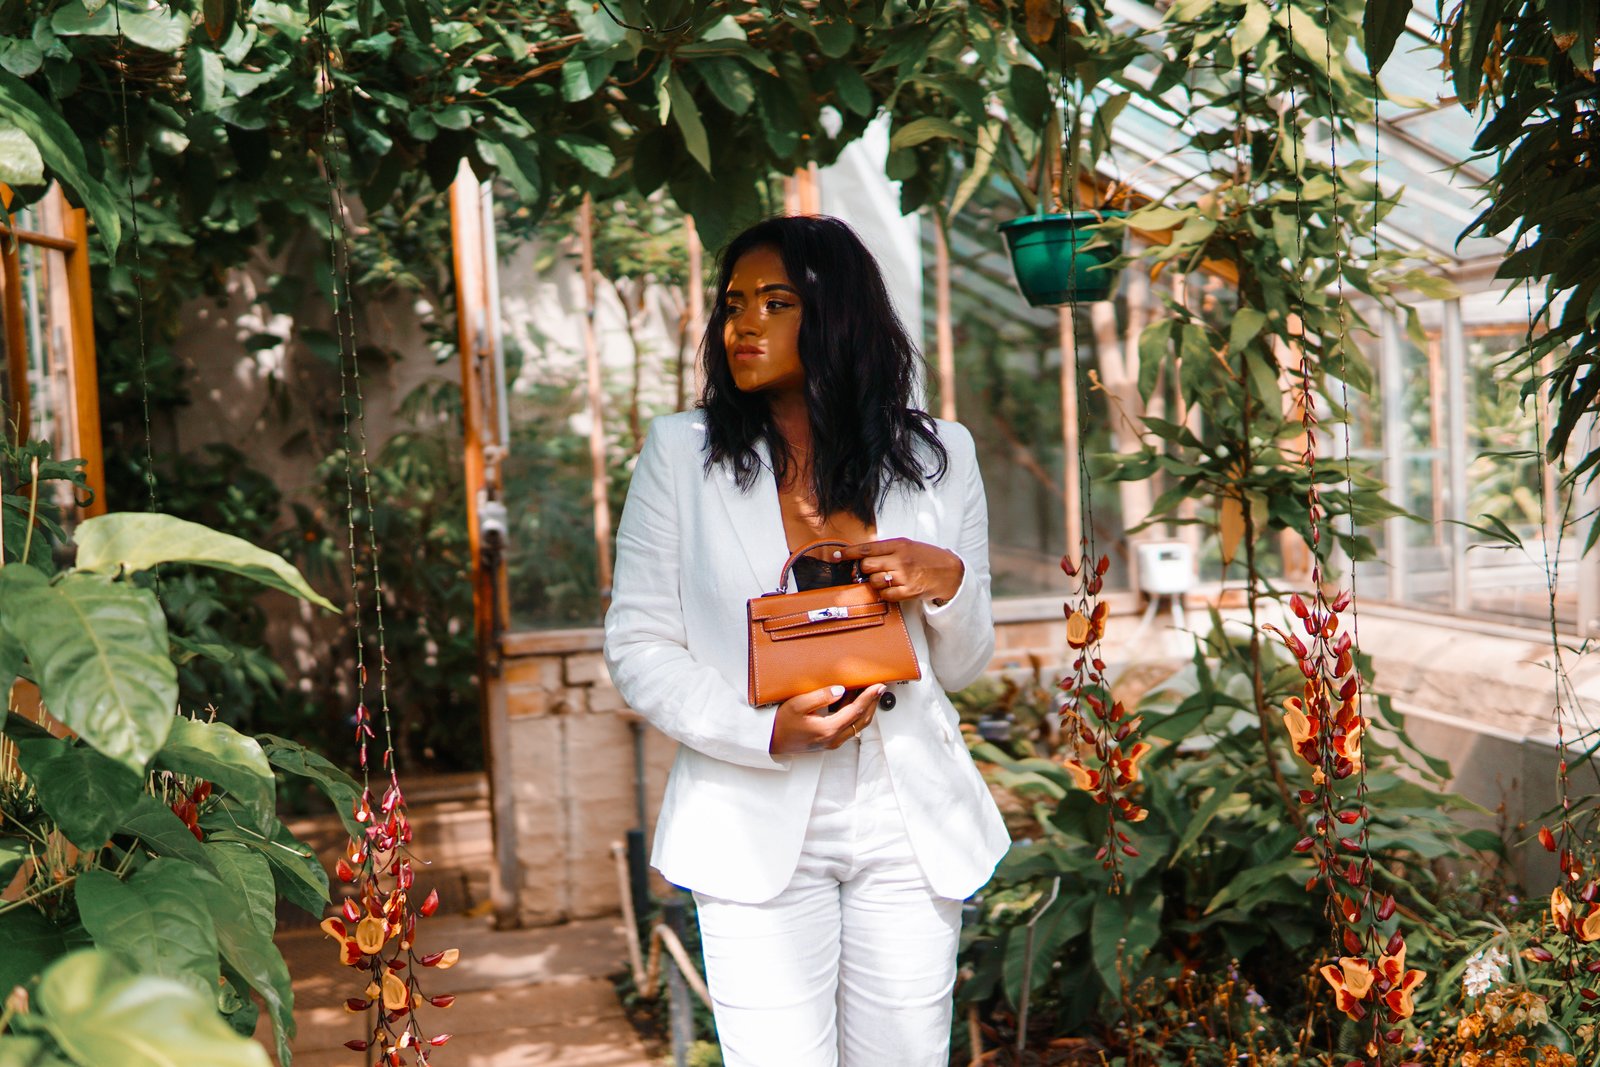 Sachini standing between exotic trees wearing a white suit holding a brown Hermès mini Kelly bag